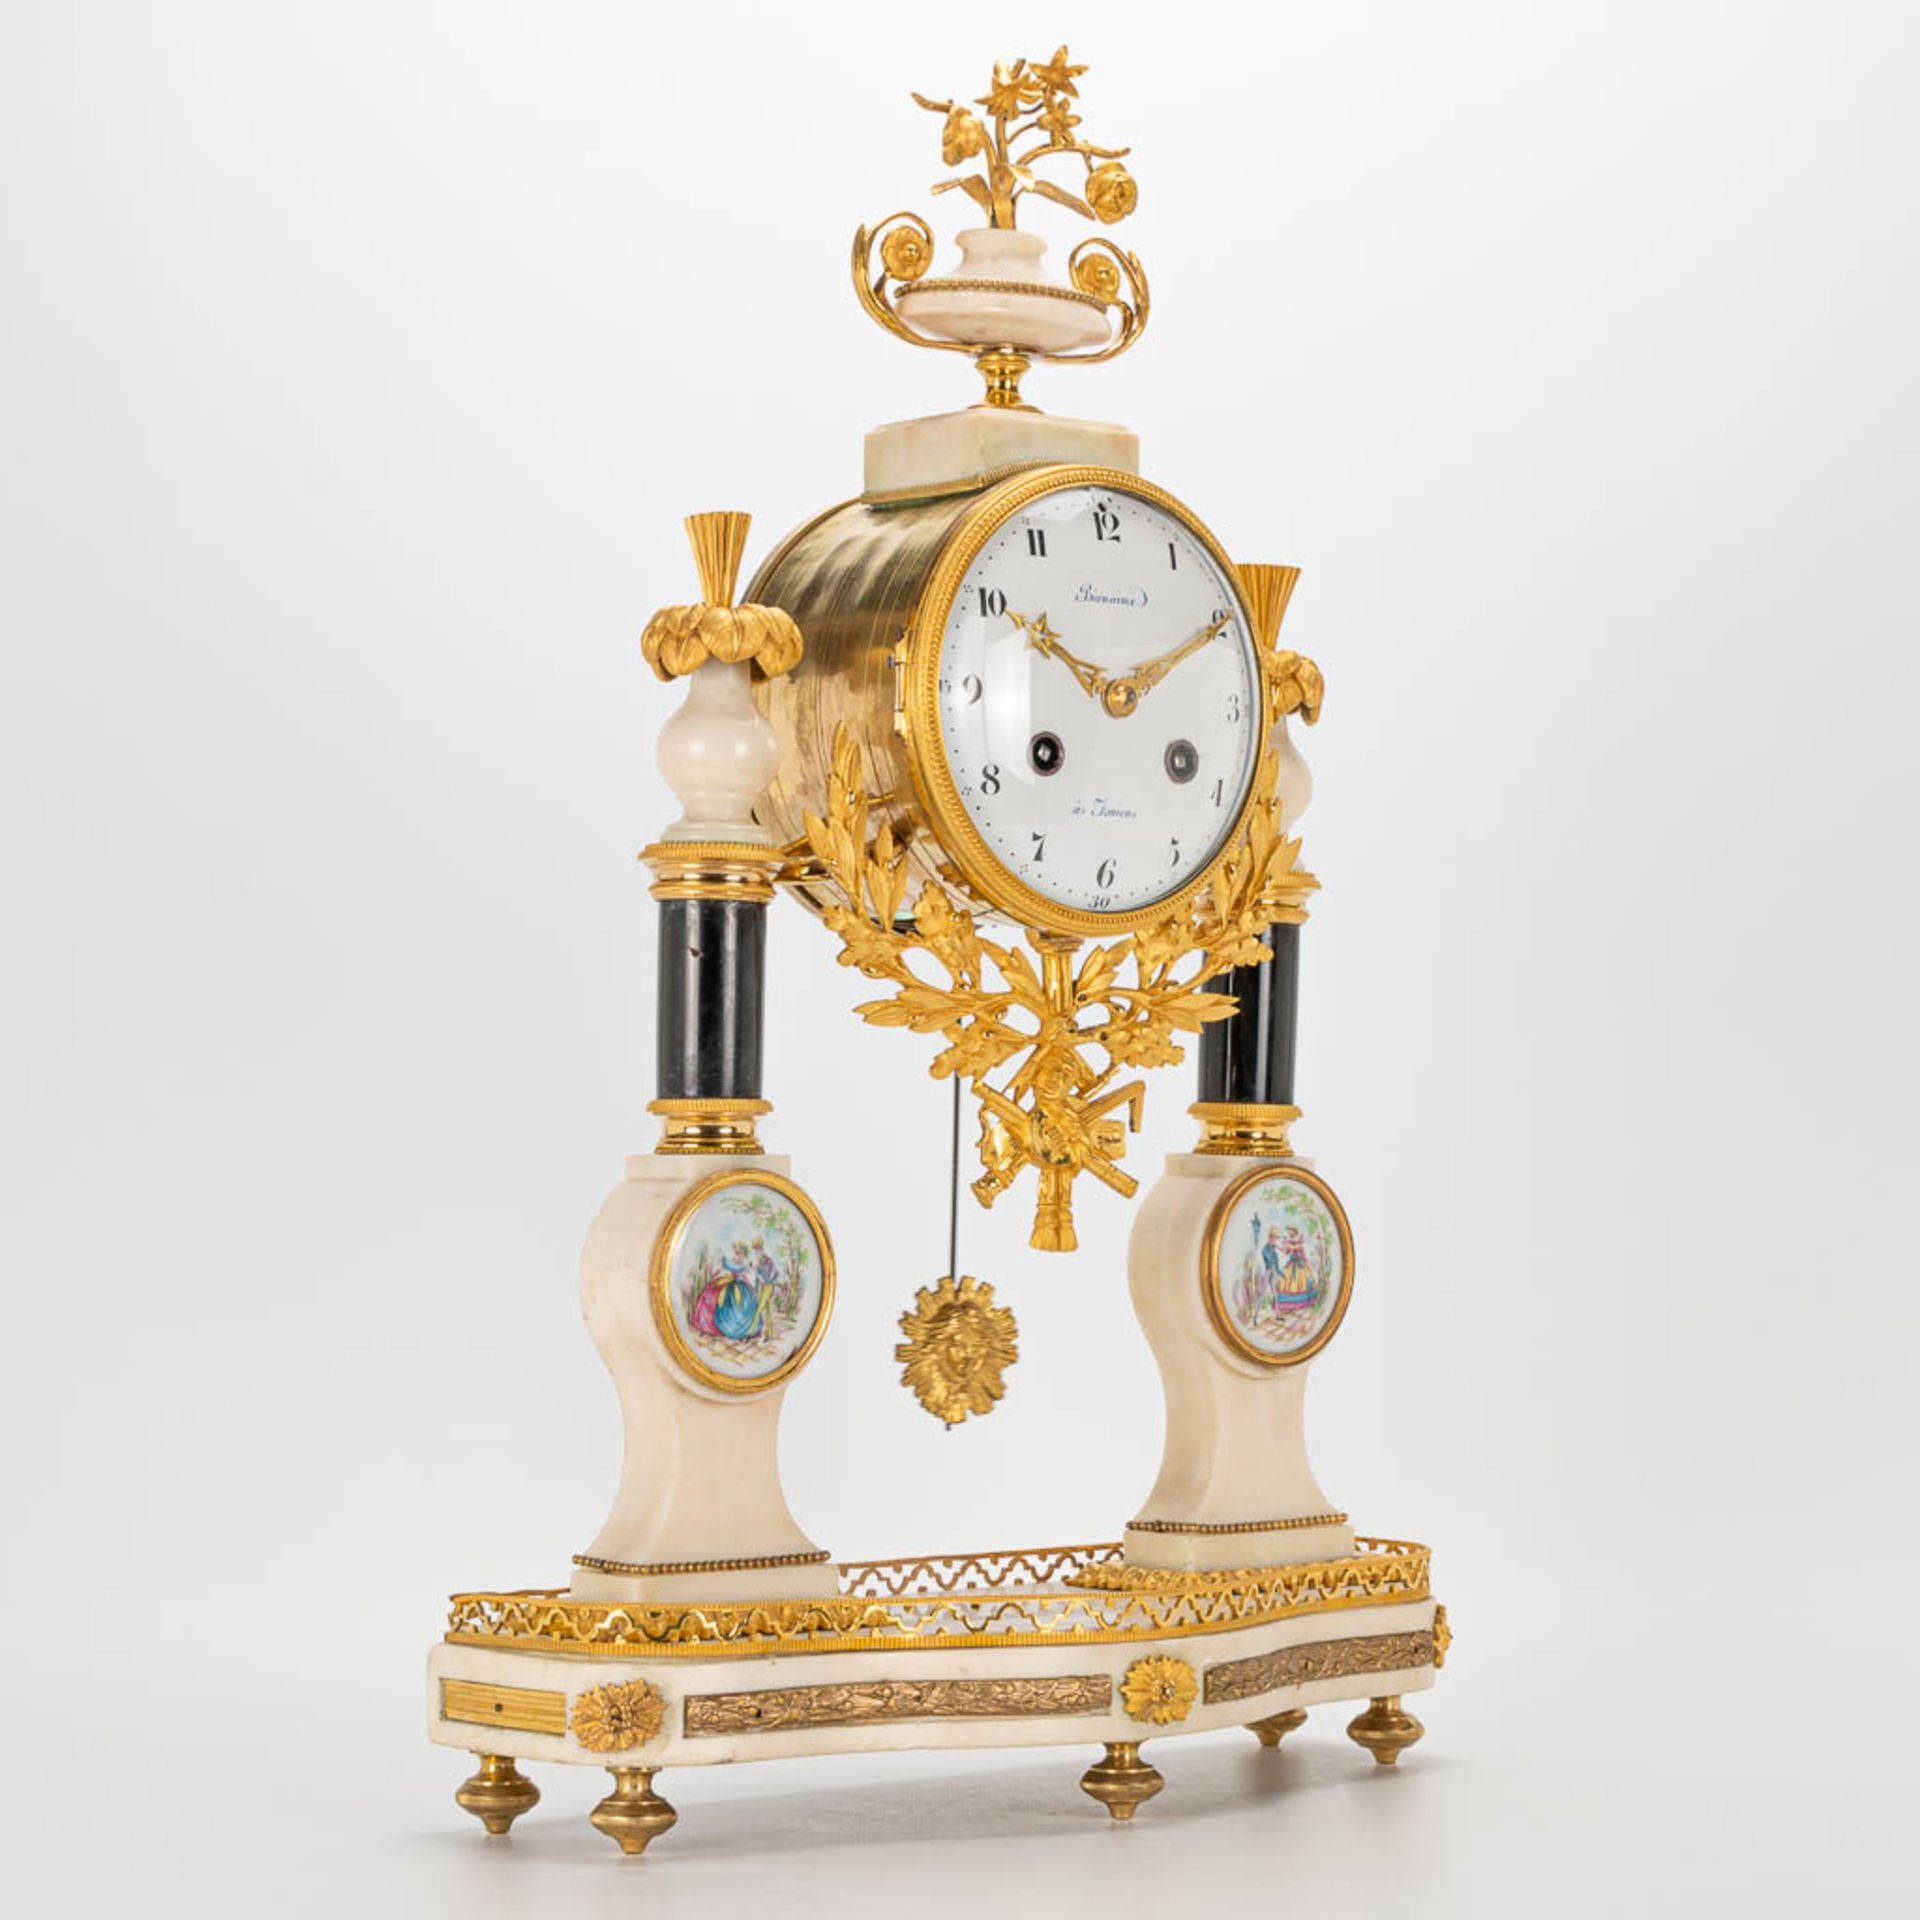 A Louis XVI style column clock made of bronze and marble, with handpainted Limoges plaques and marke - Image 3 of 23